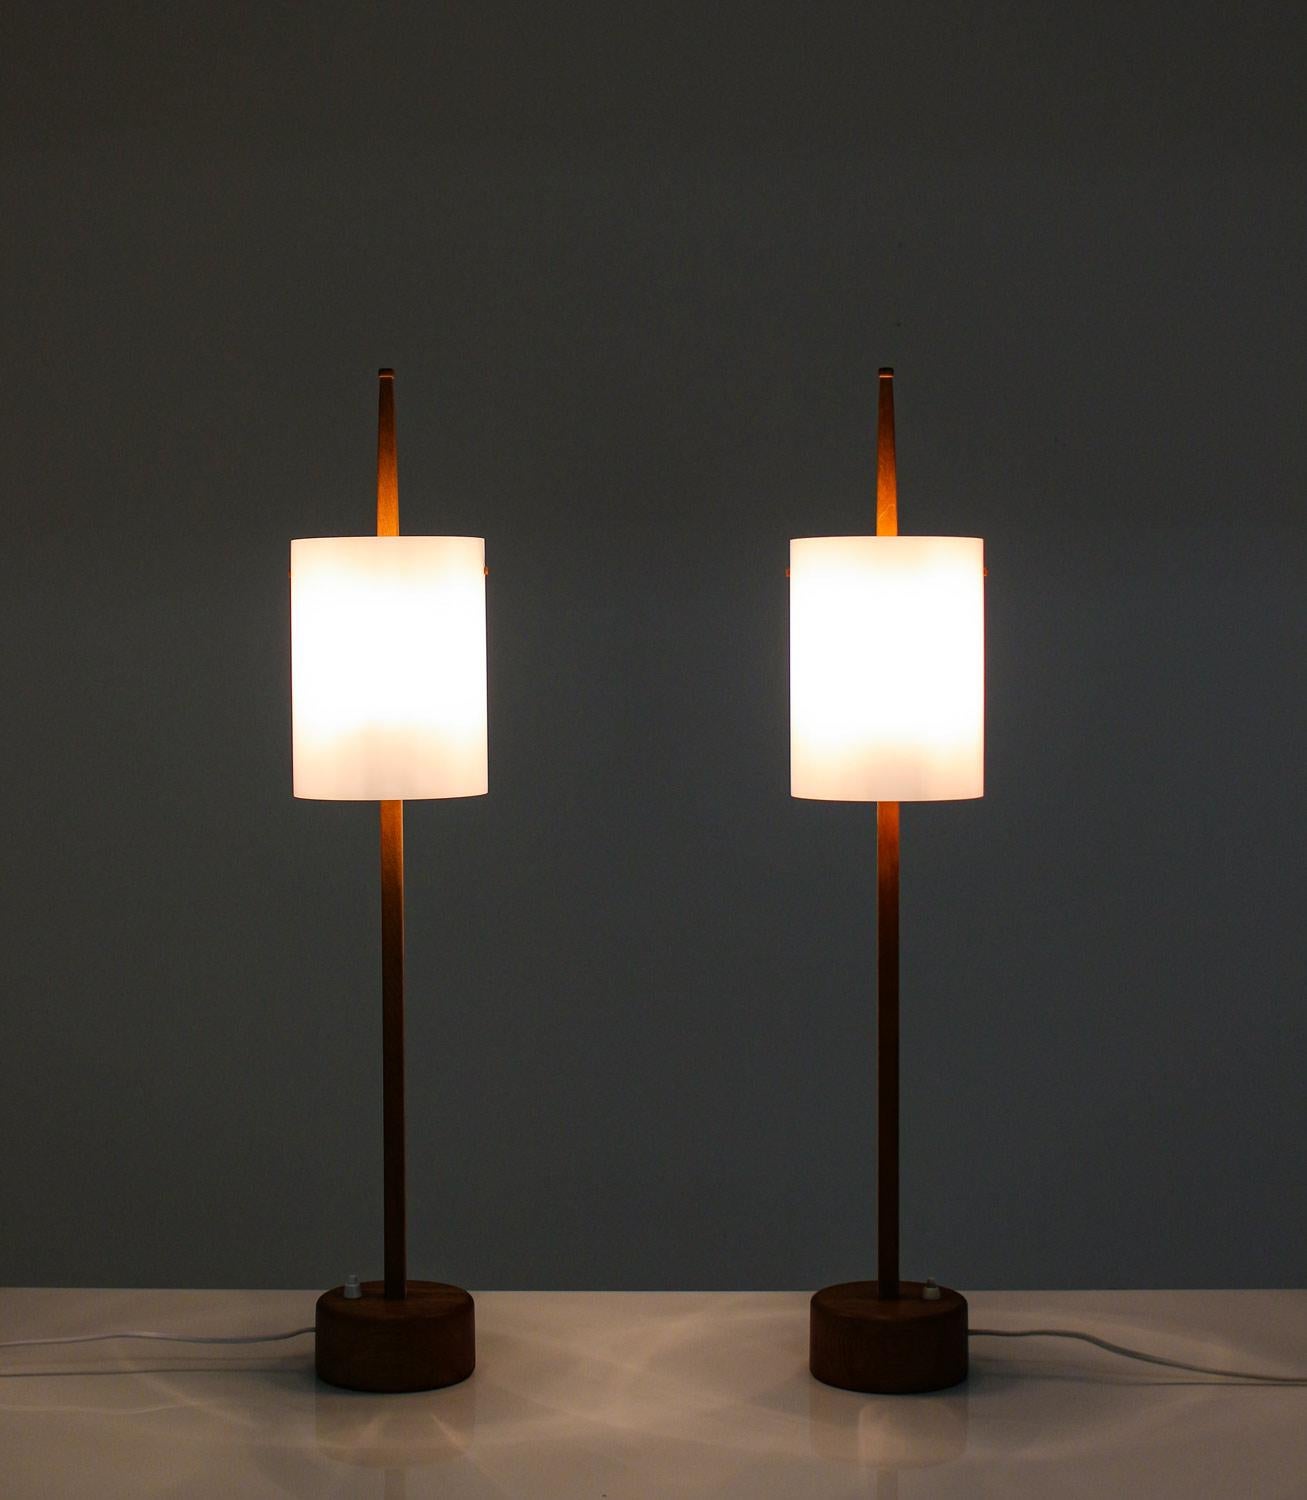 Rare pair of table lamps by Uno & Östen Kristiansson for Luxus. 
The lamps consist of two light sources, hidden by an acrylic shade. The shade rests on an oak pole, which sits on a thick wooden foot with a heavy iron plate on the bottom. Very high